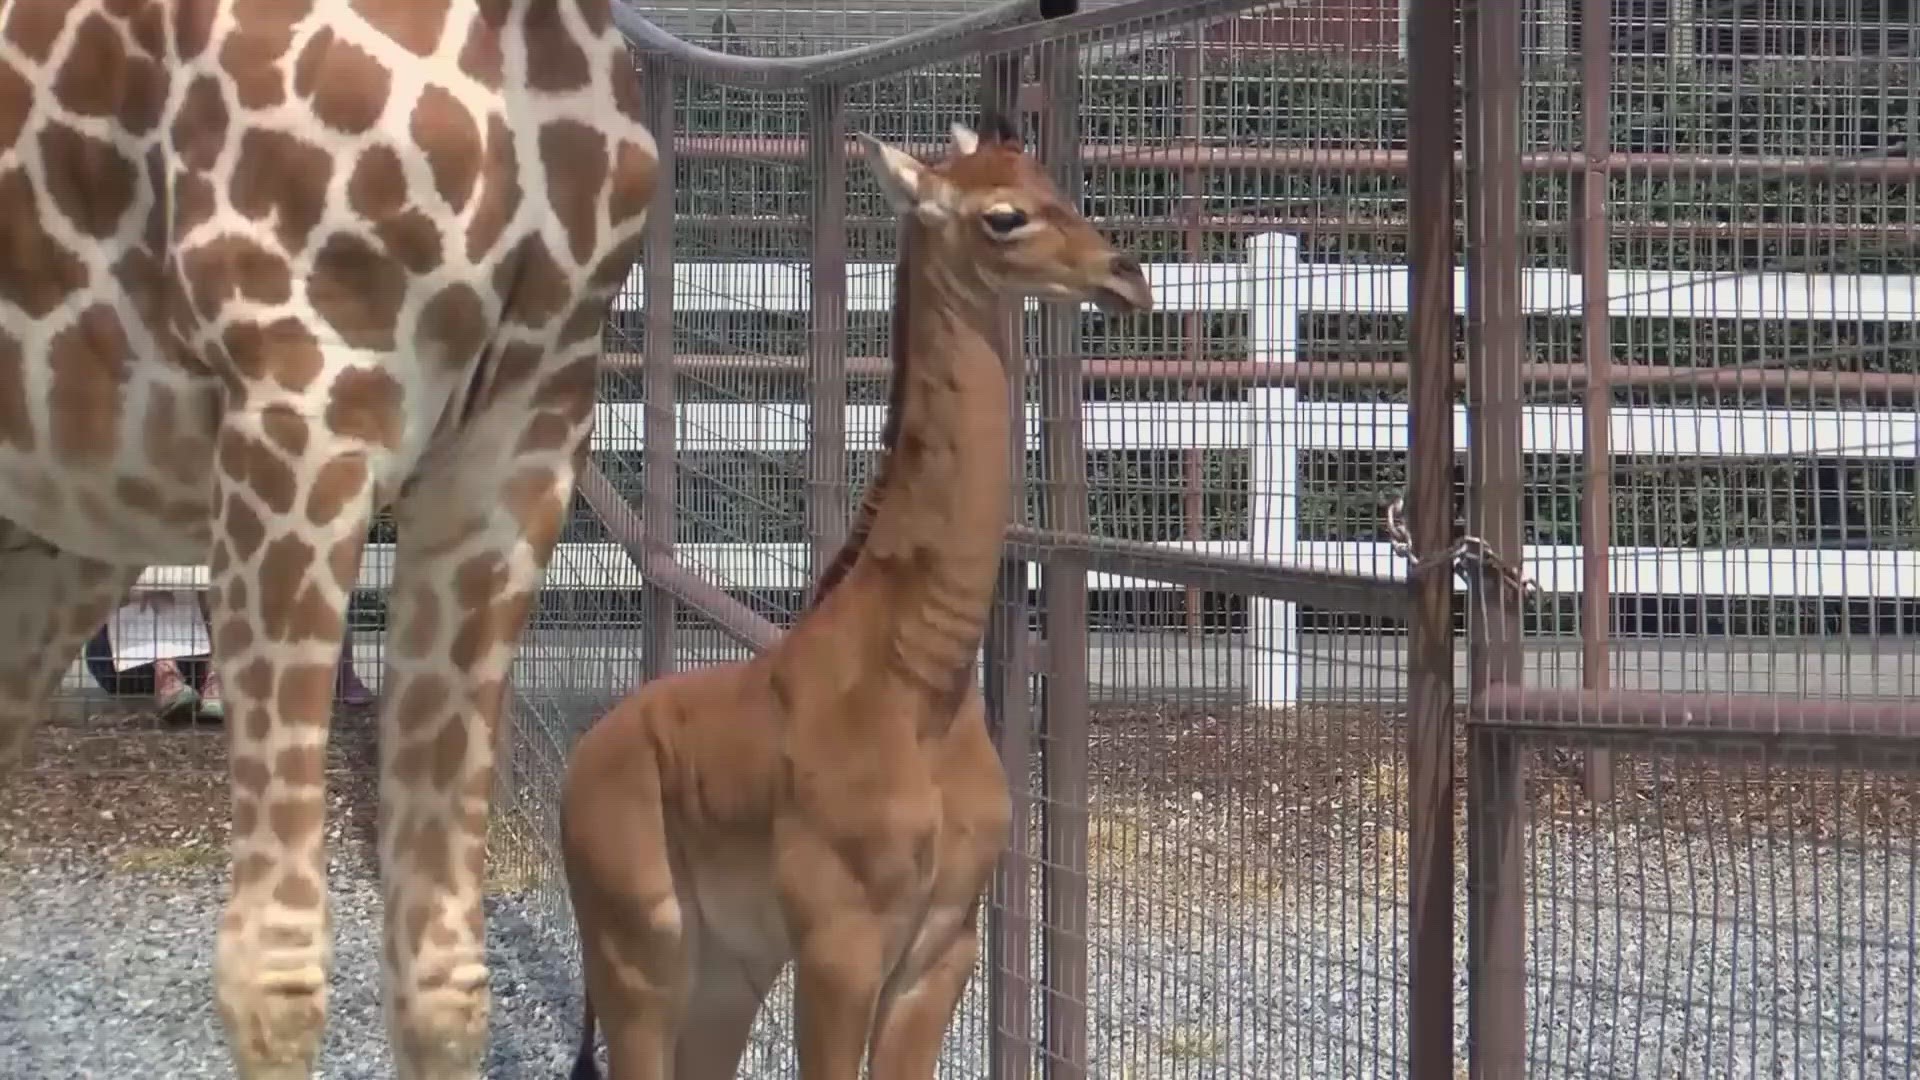 The spotless giraffe was born at Brights Zoo in Limestone, Tennessee, on July 31; experts believe she is the only solid-colored  reticulated giraffe on the planet.